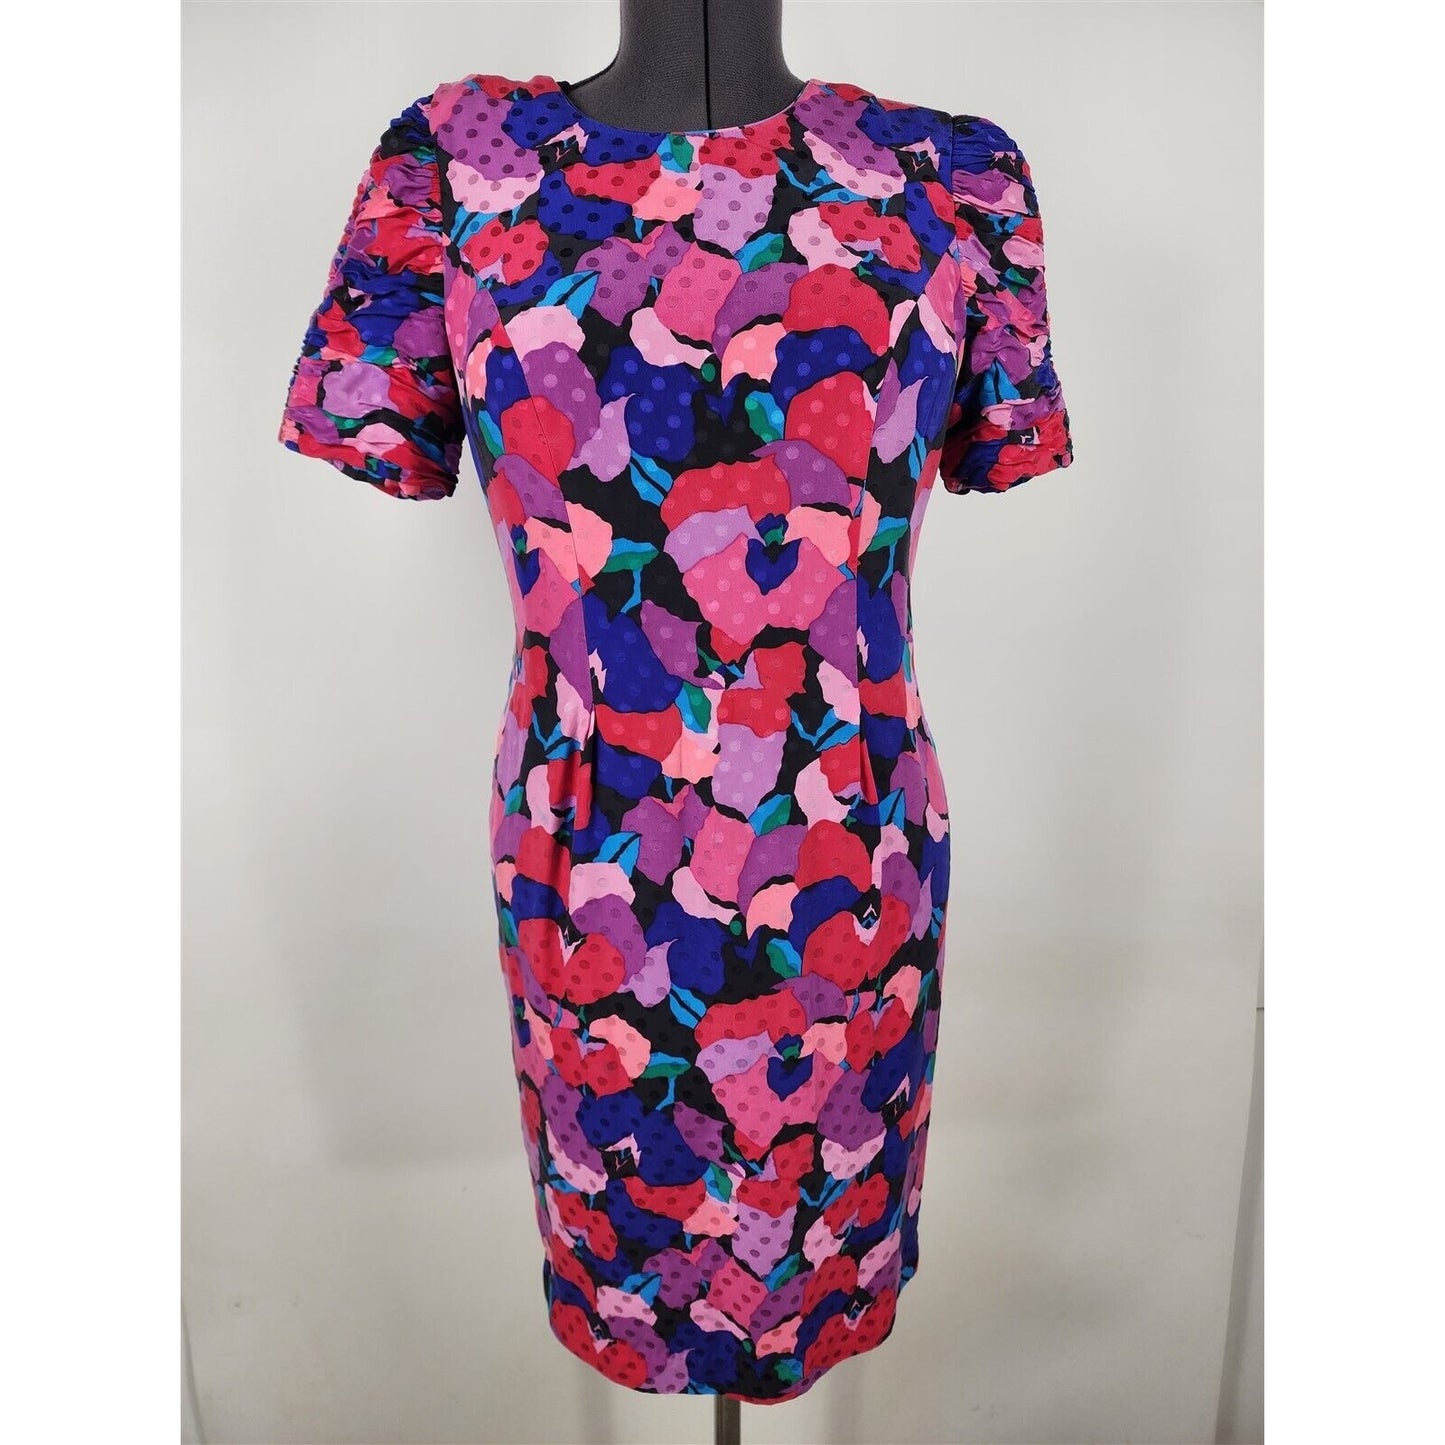 Vintage 80s Vibrant Print Silk Dress Short Sleeve Colorful Hot Pink Red Size 10P